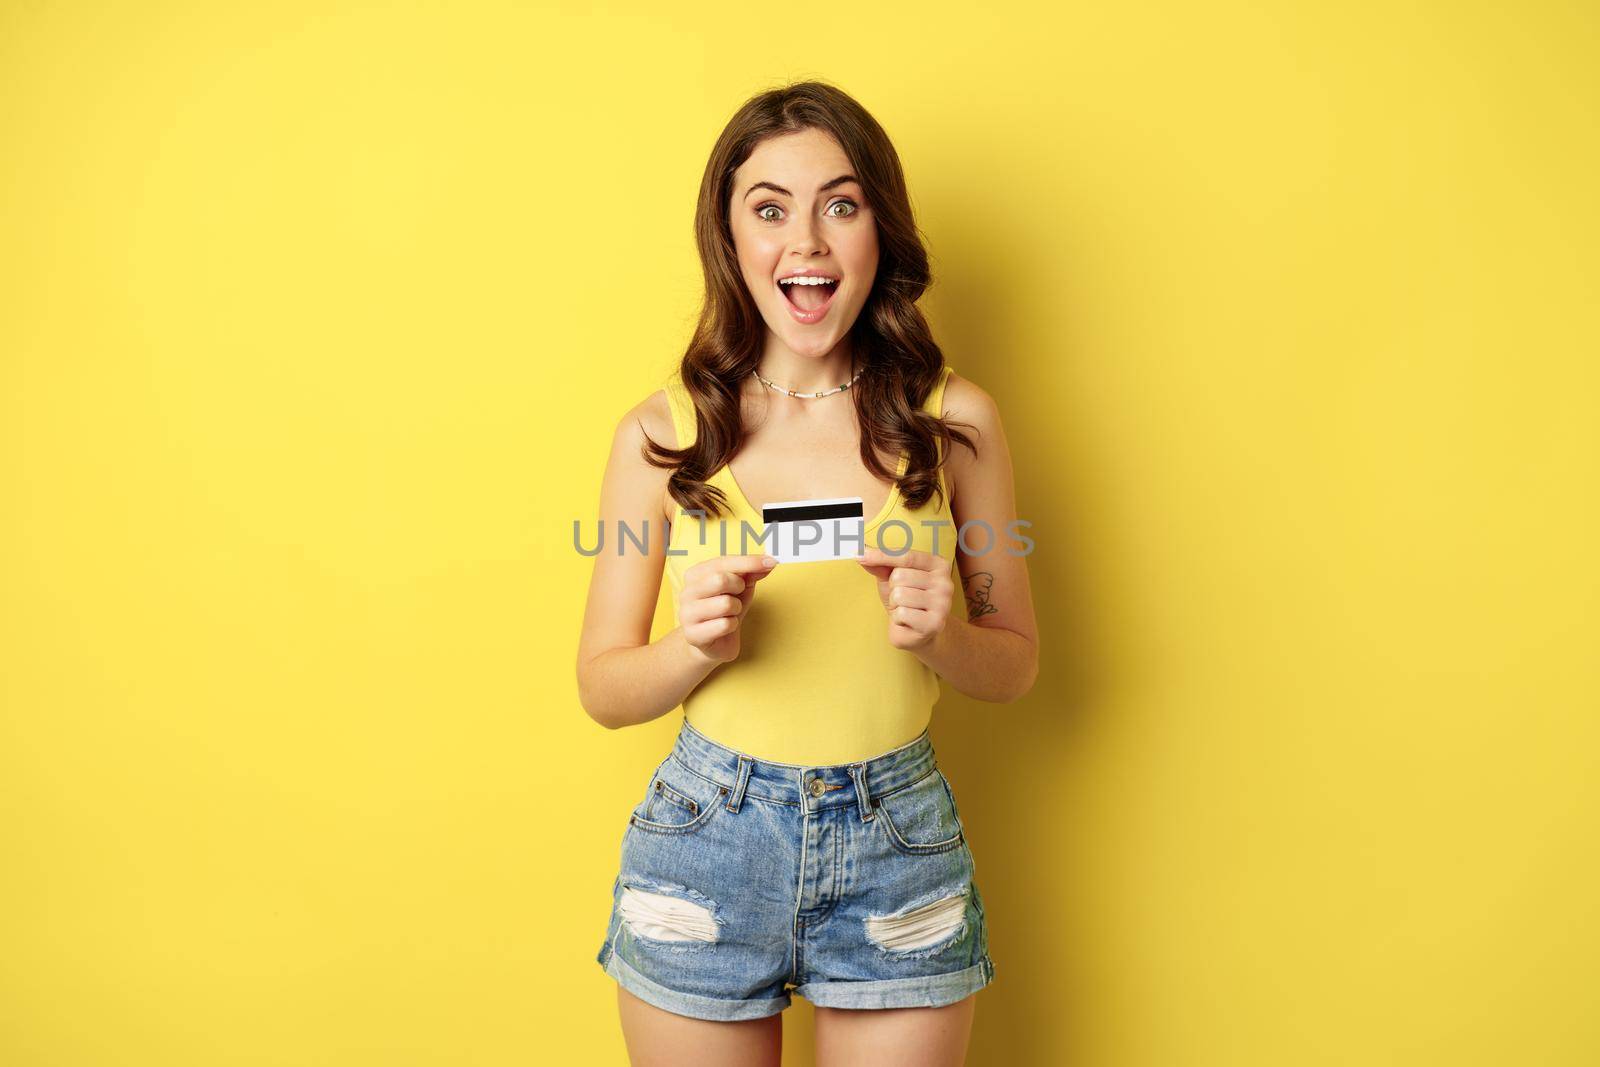 Enthusiastic young woman showing credit card, recommending bank, discount in store, contactless payment or cashback, standing over yellow background.